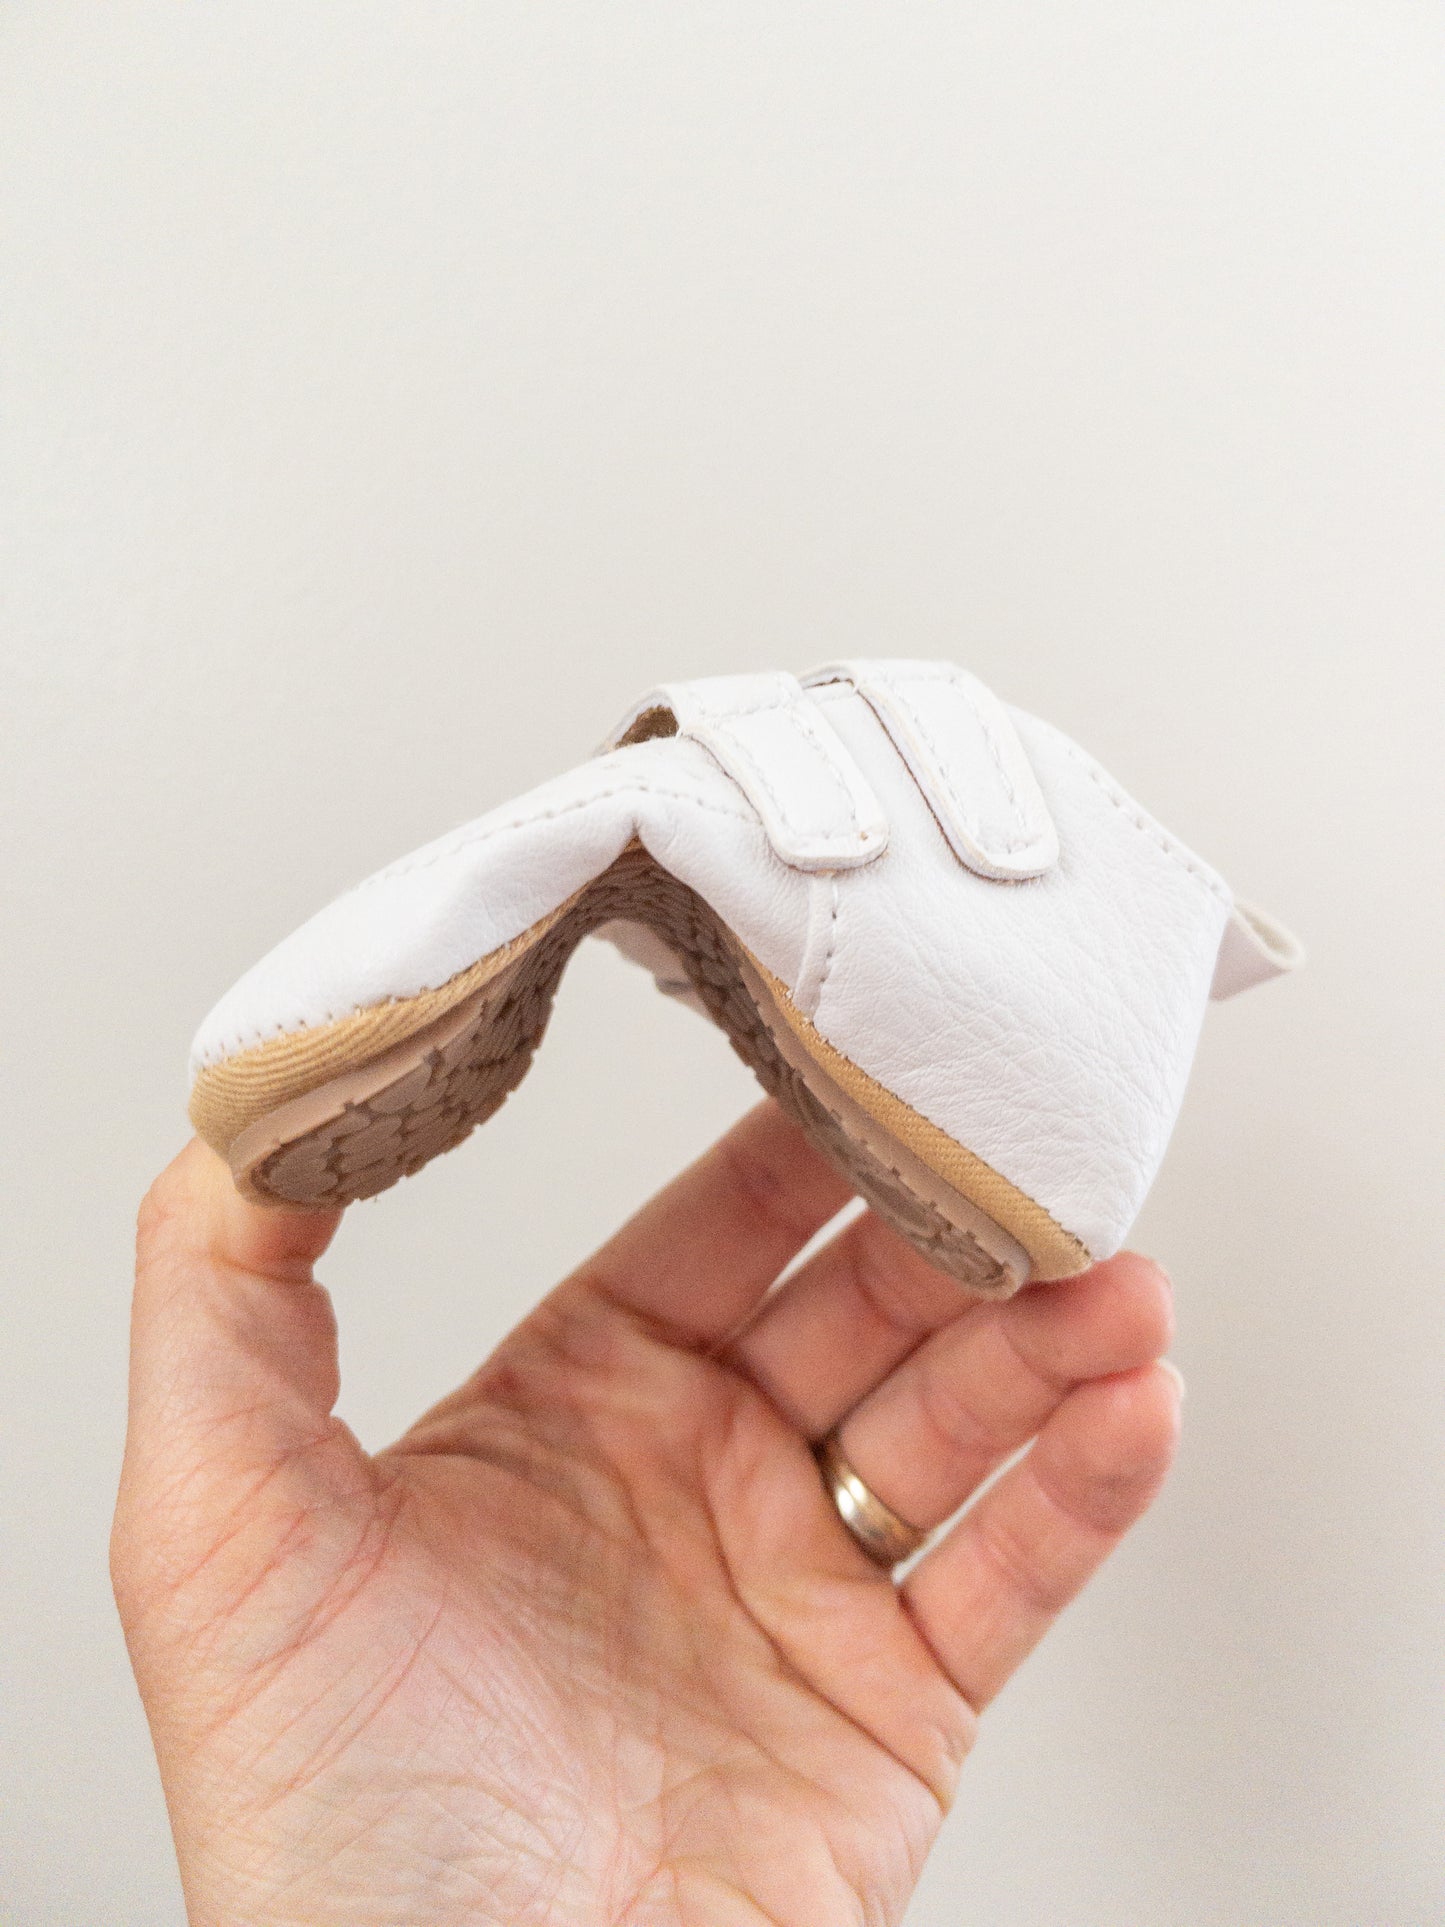 Double Strap Baby Shoes | 5 colors